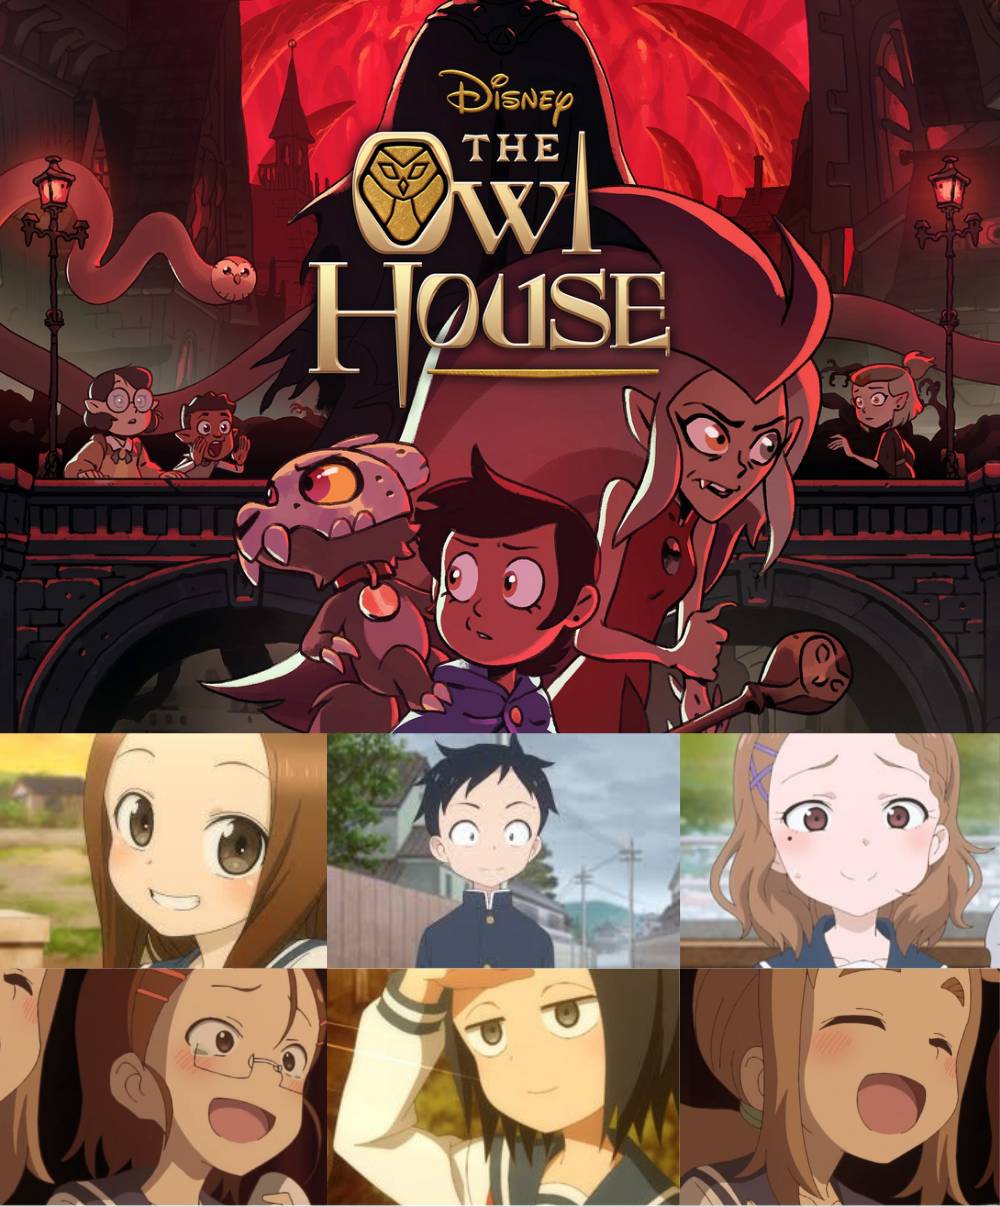 My Top 10 Favorite The Owl House Characters by Chrisarus12 on